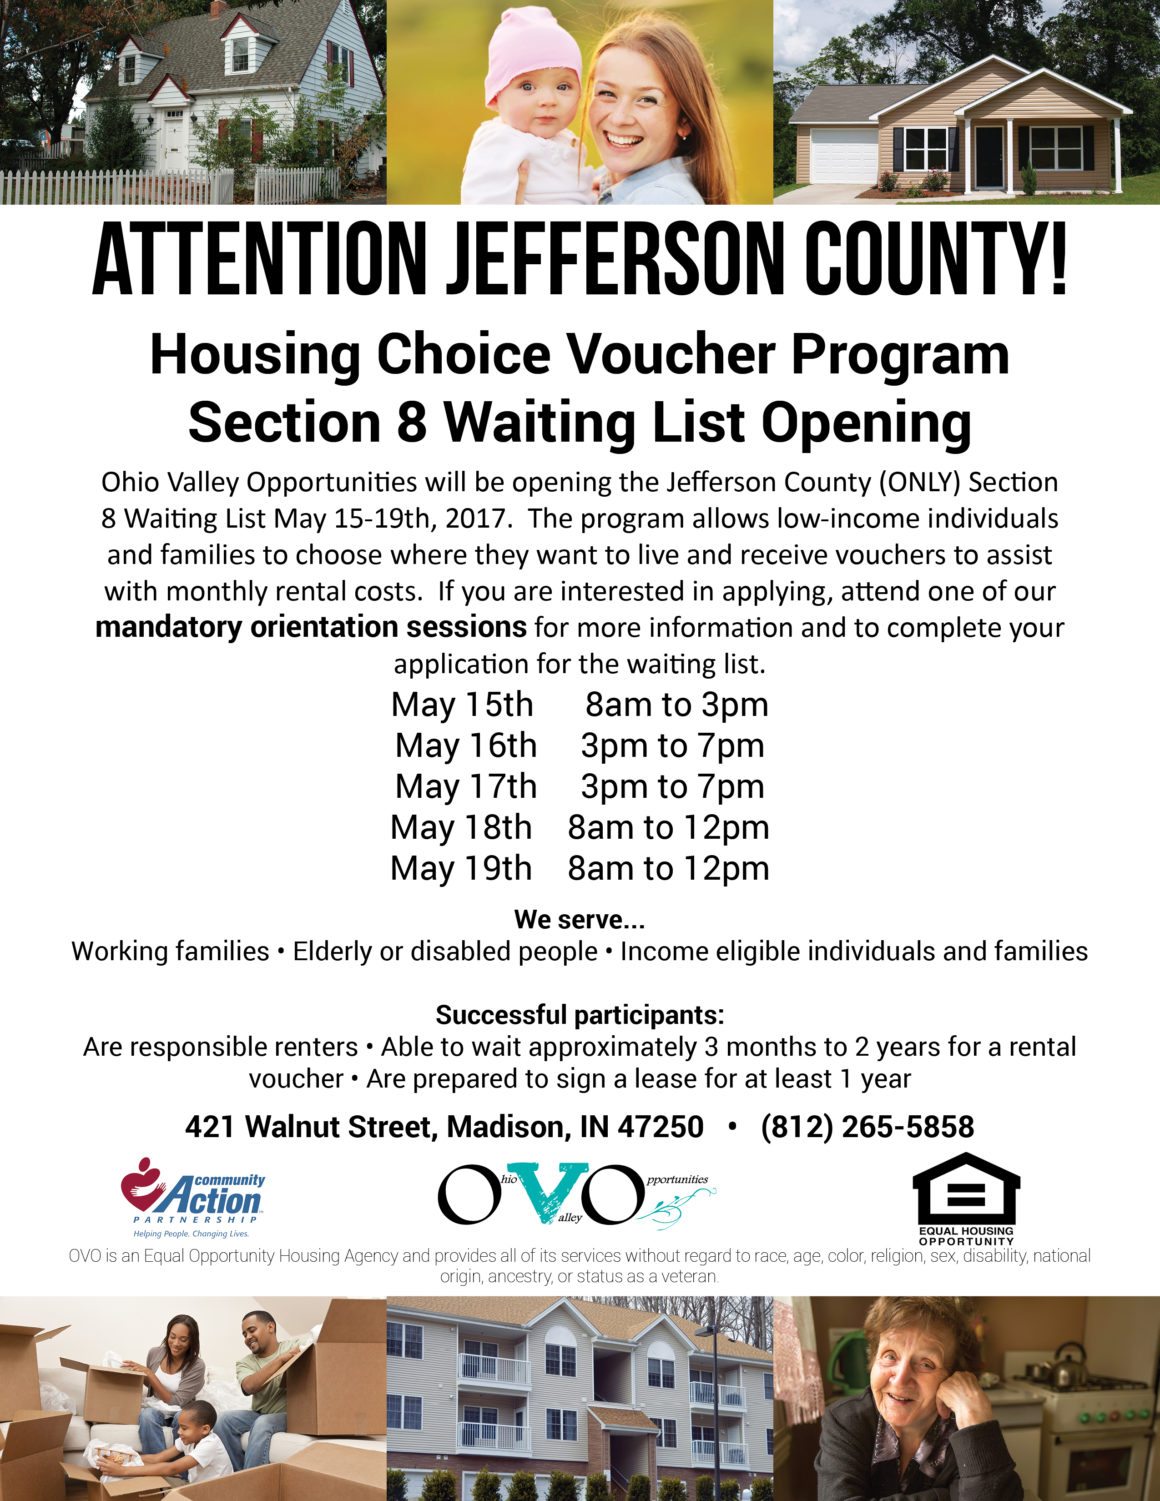 JEFFERSON COUNTY Section 8 Waiting List Opening in May!